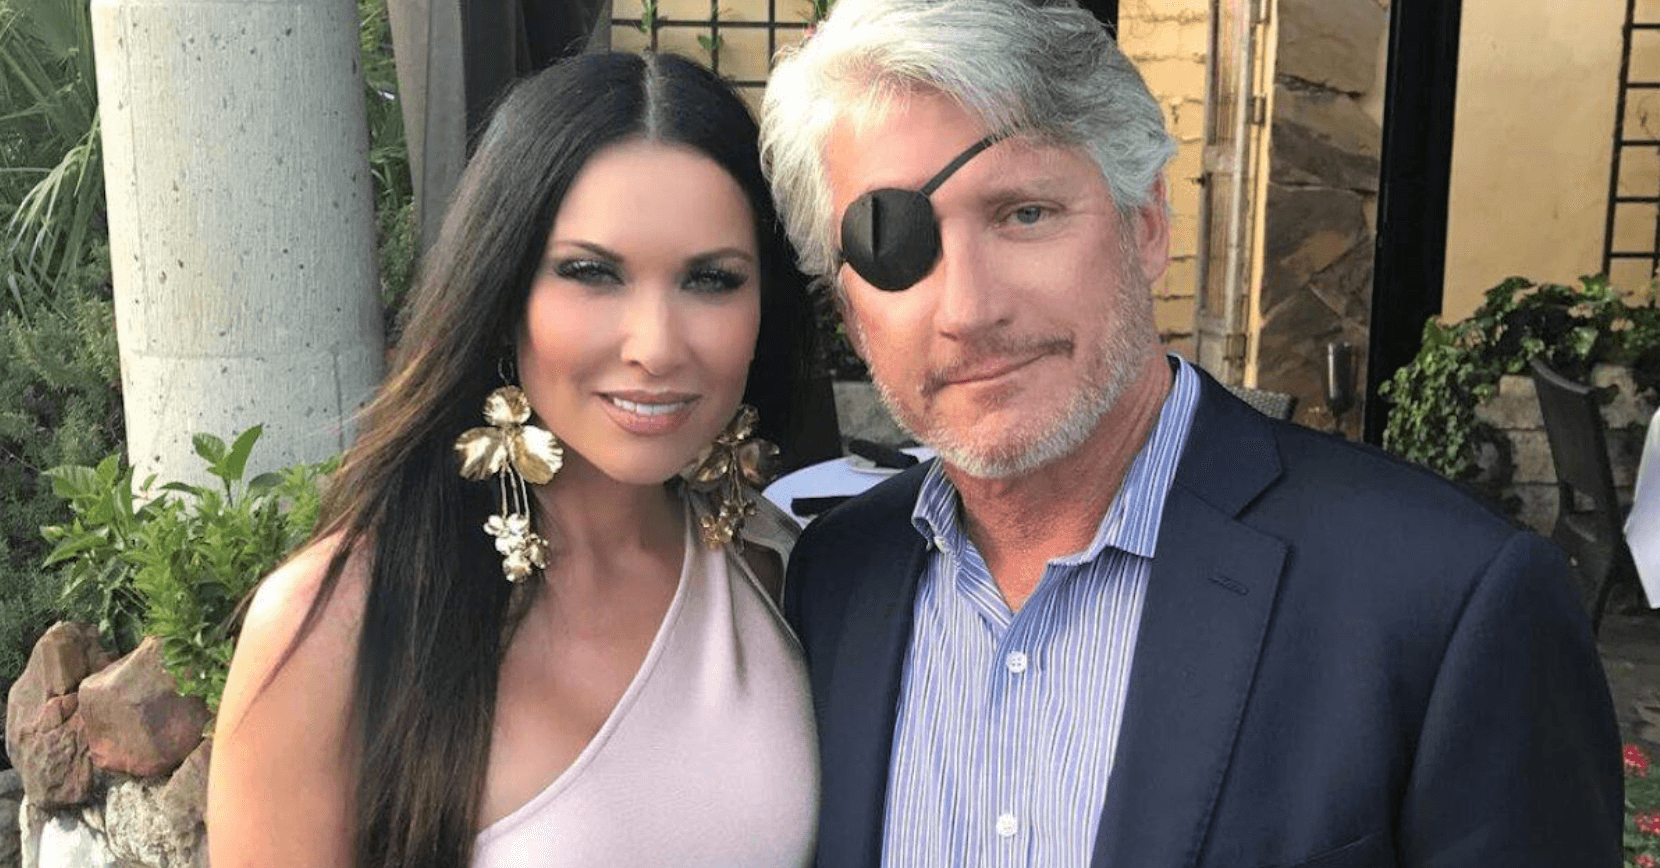 LeeAnne Locken’s Husband Rich Emberlin Deletes Twitter Account After Backlash Over Racist Tweet About The Murder of George Floyd!